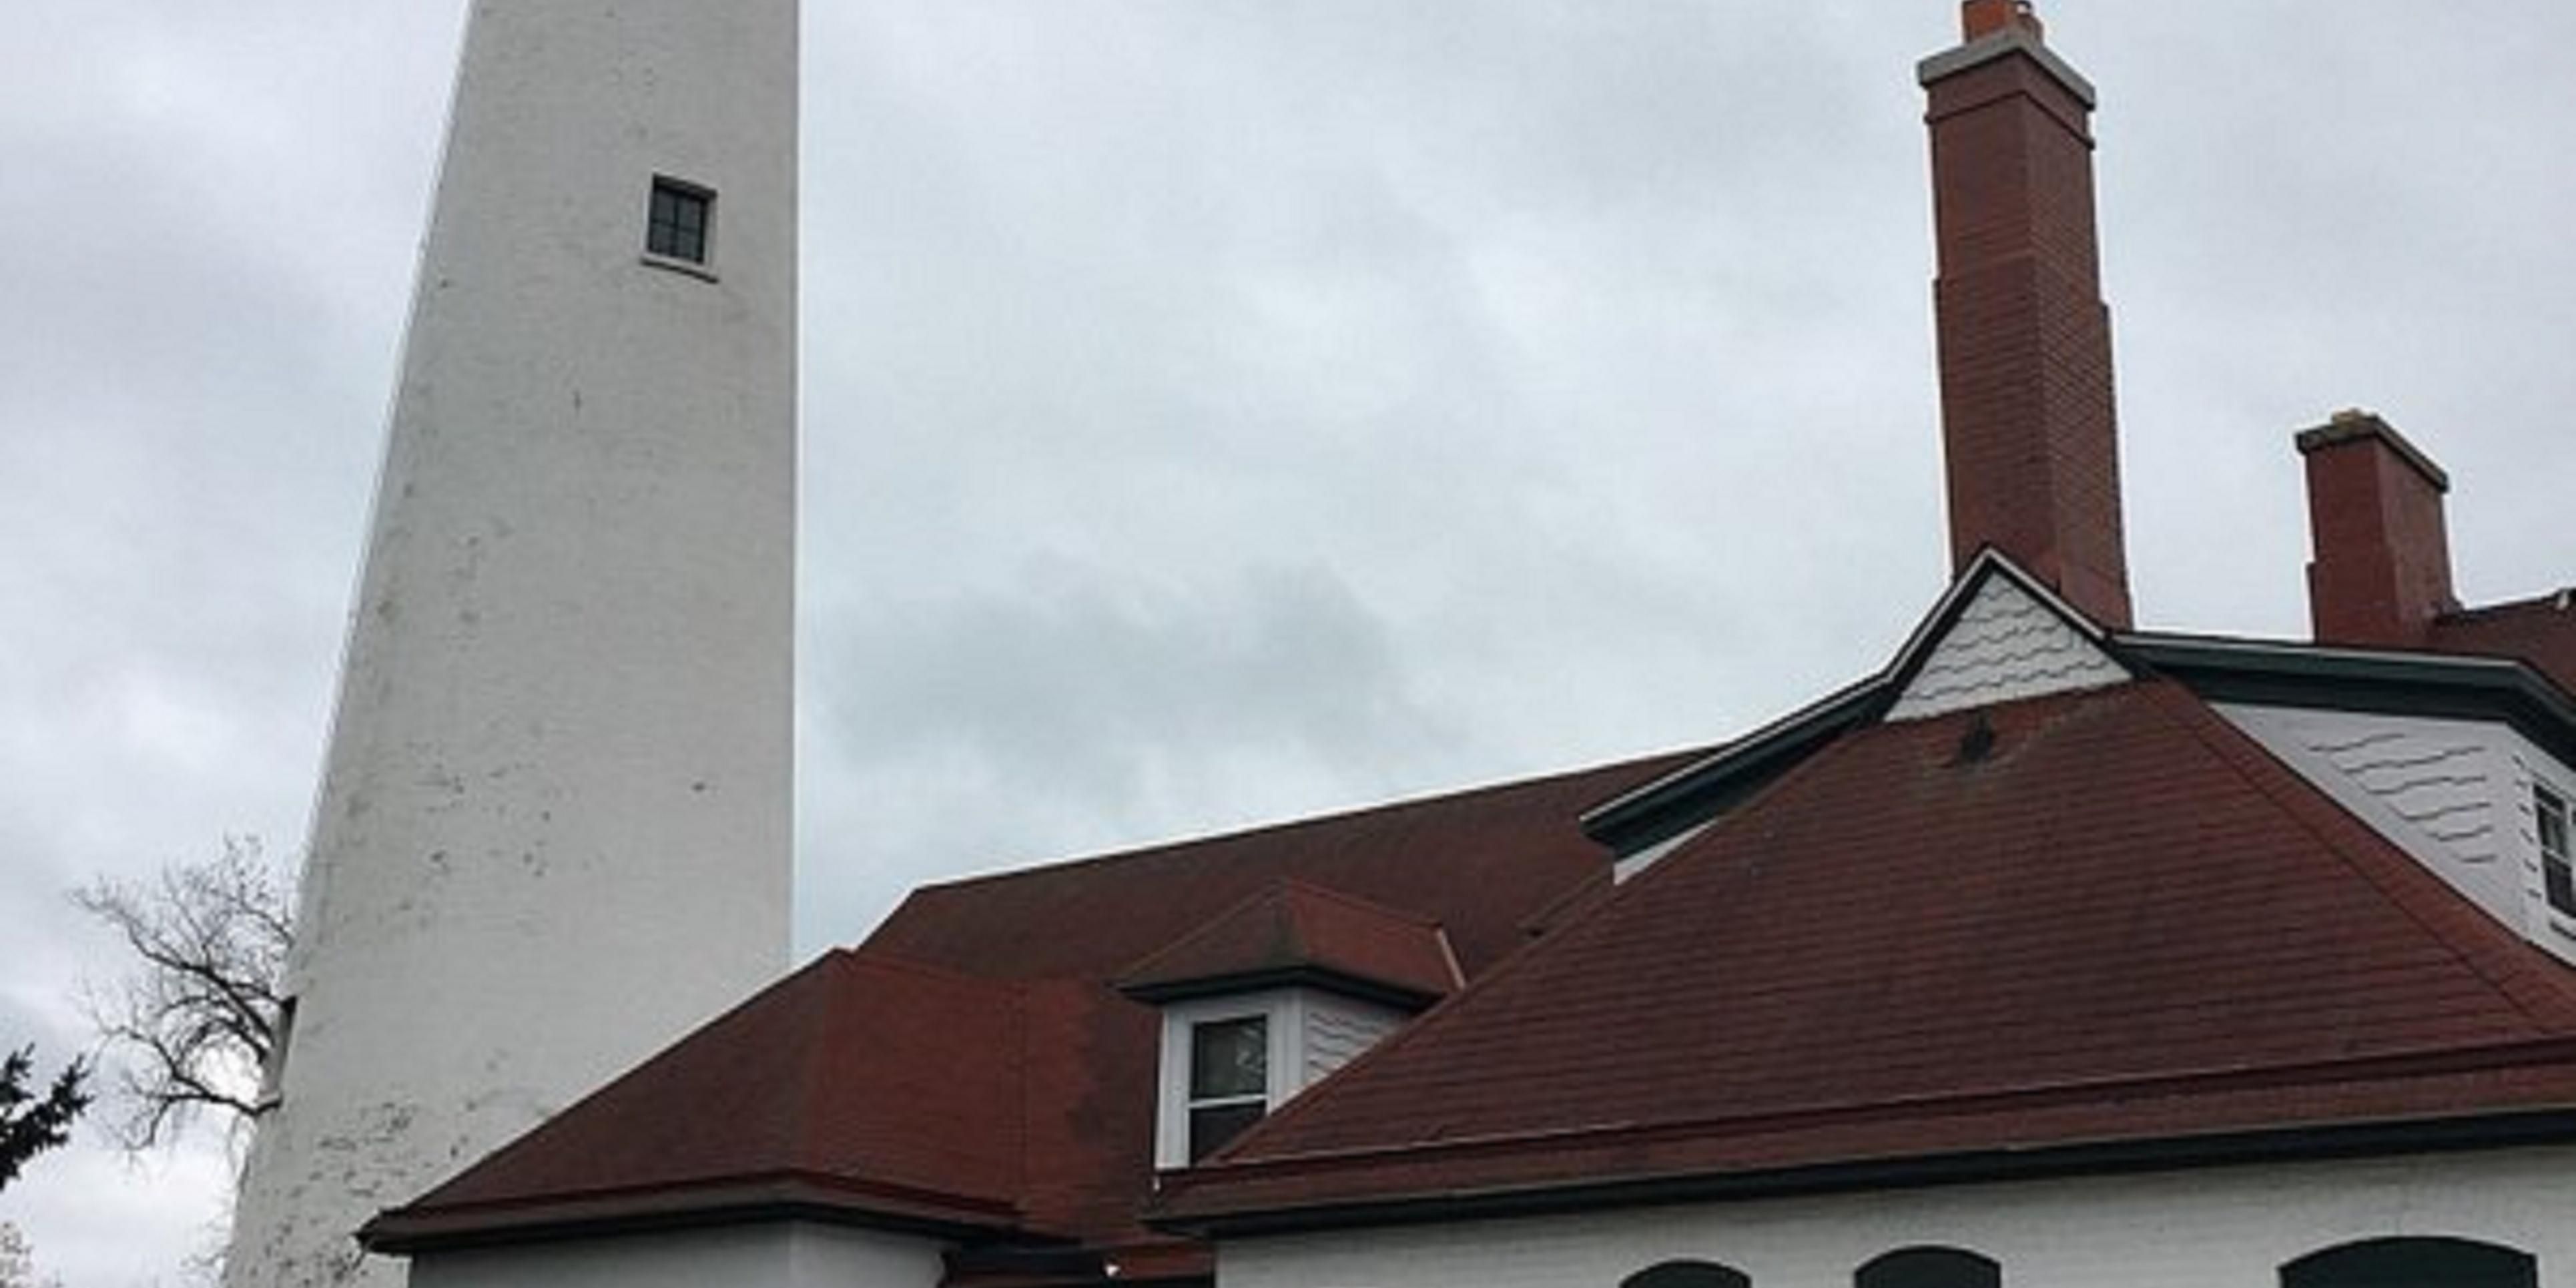 Located in the Village of Wind Point in Racine County, Wisconsin, the Wind Point Lighthouse stands 108 feet tall and is listed on the National Register of Historic Places.